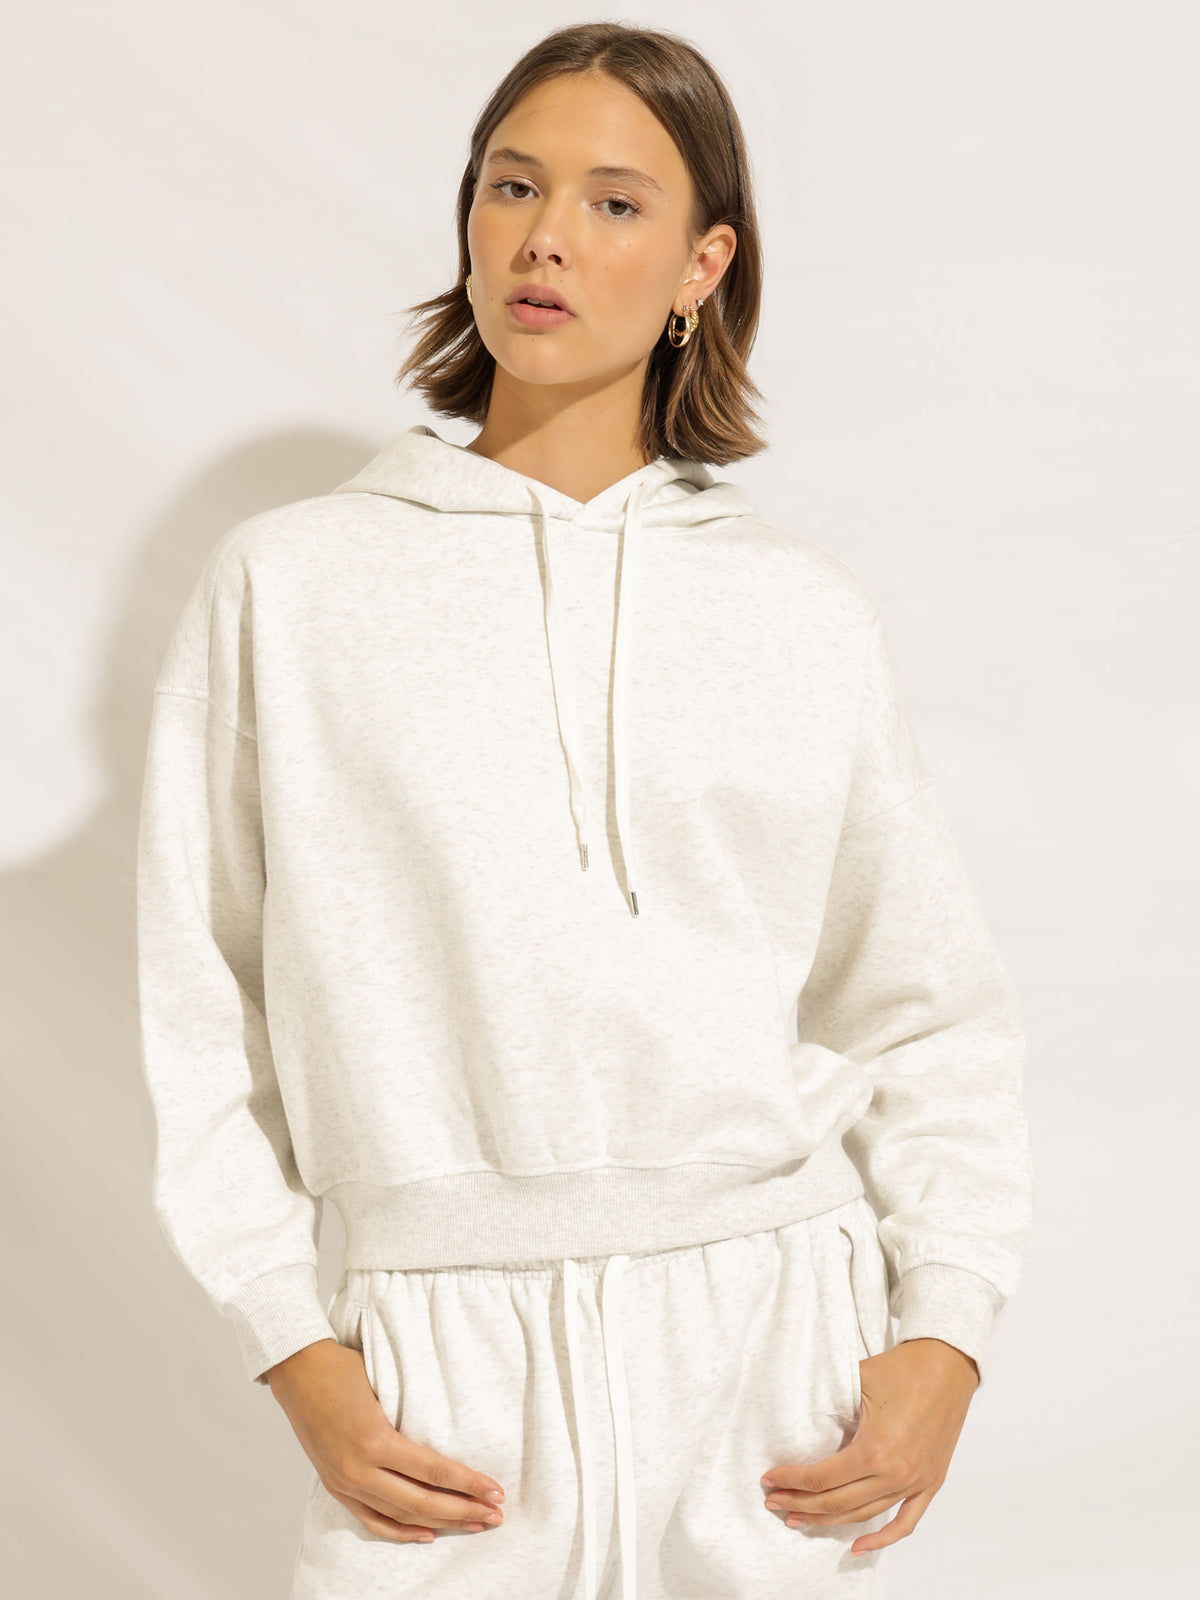 Classic Carter Hoodie in Snow Marle